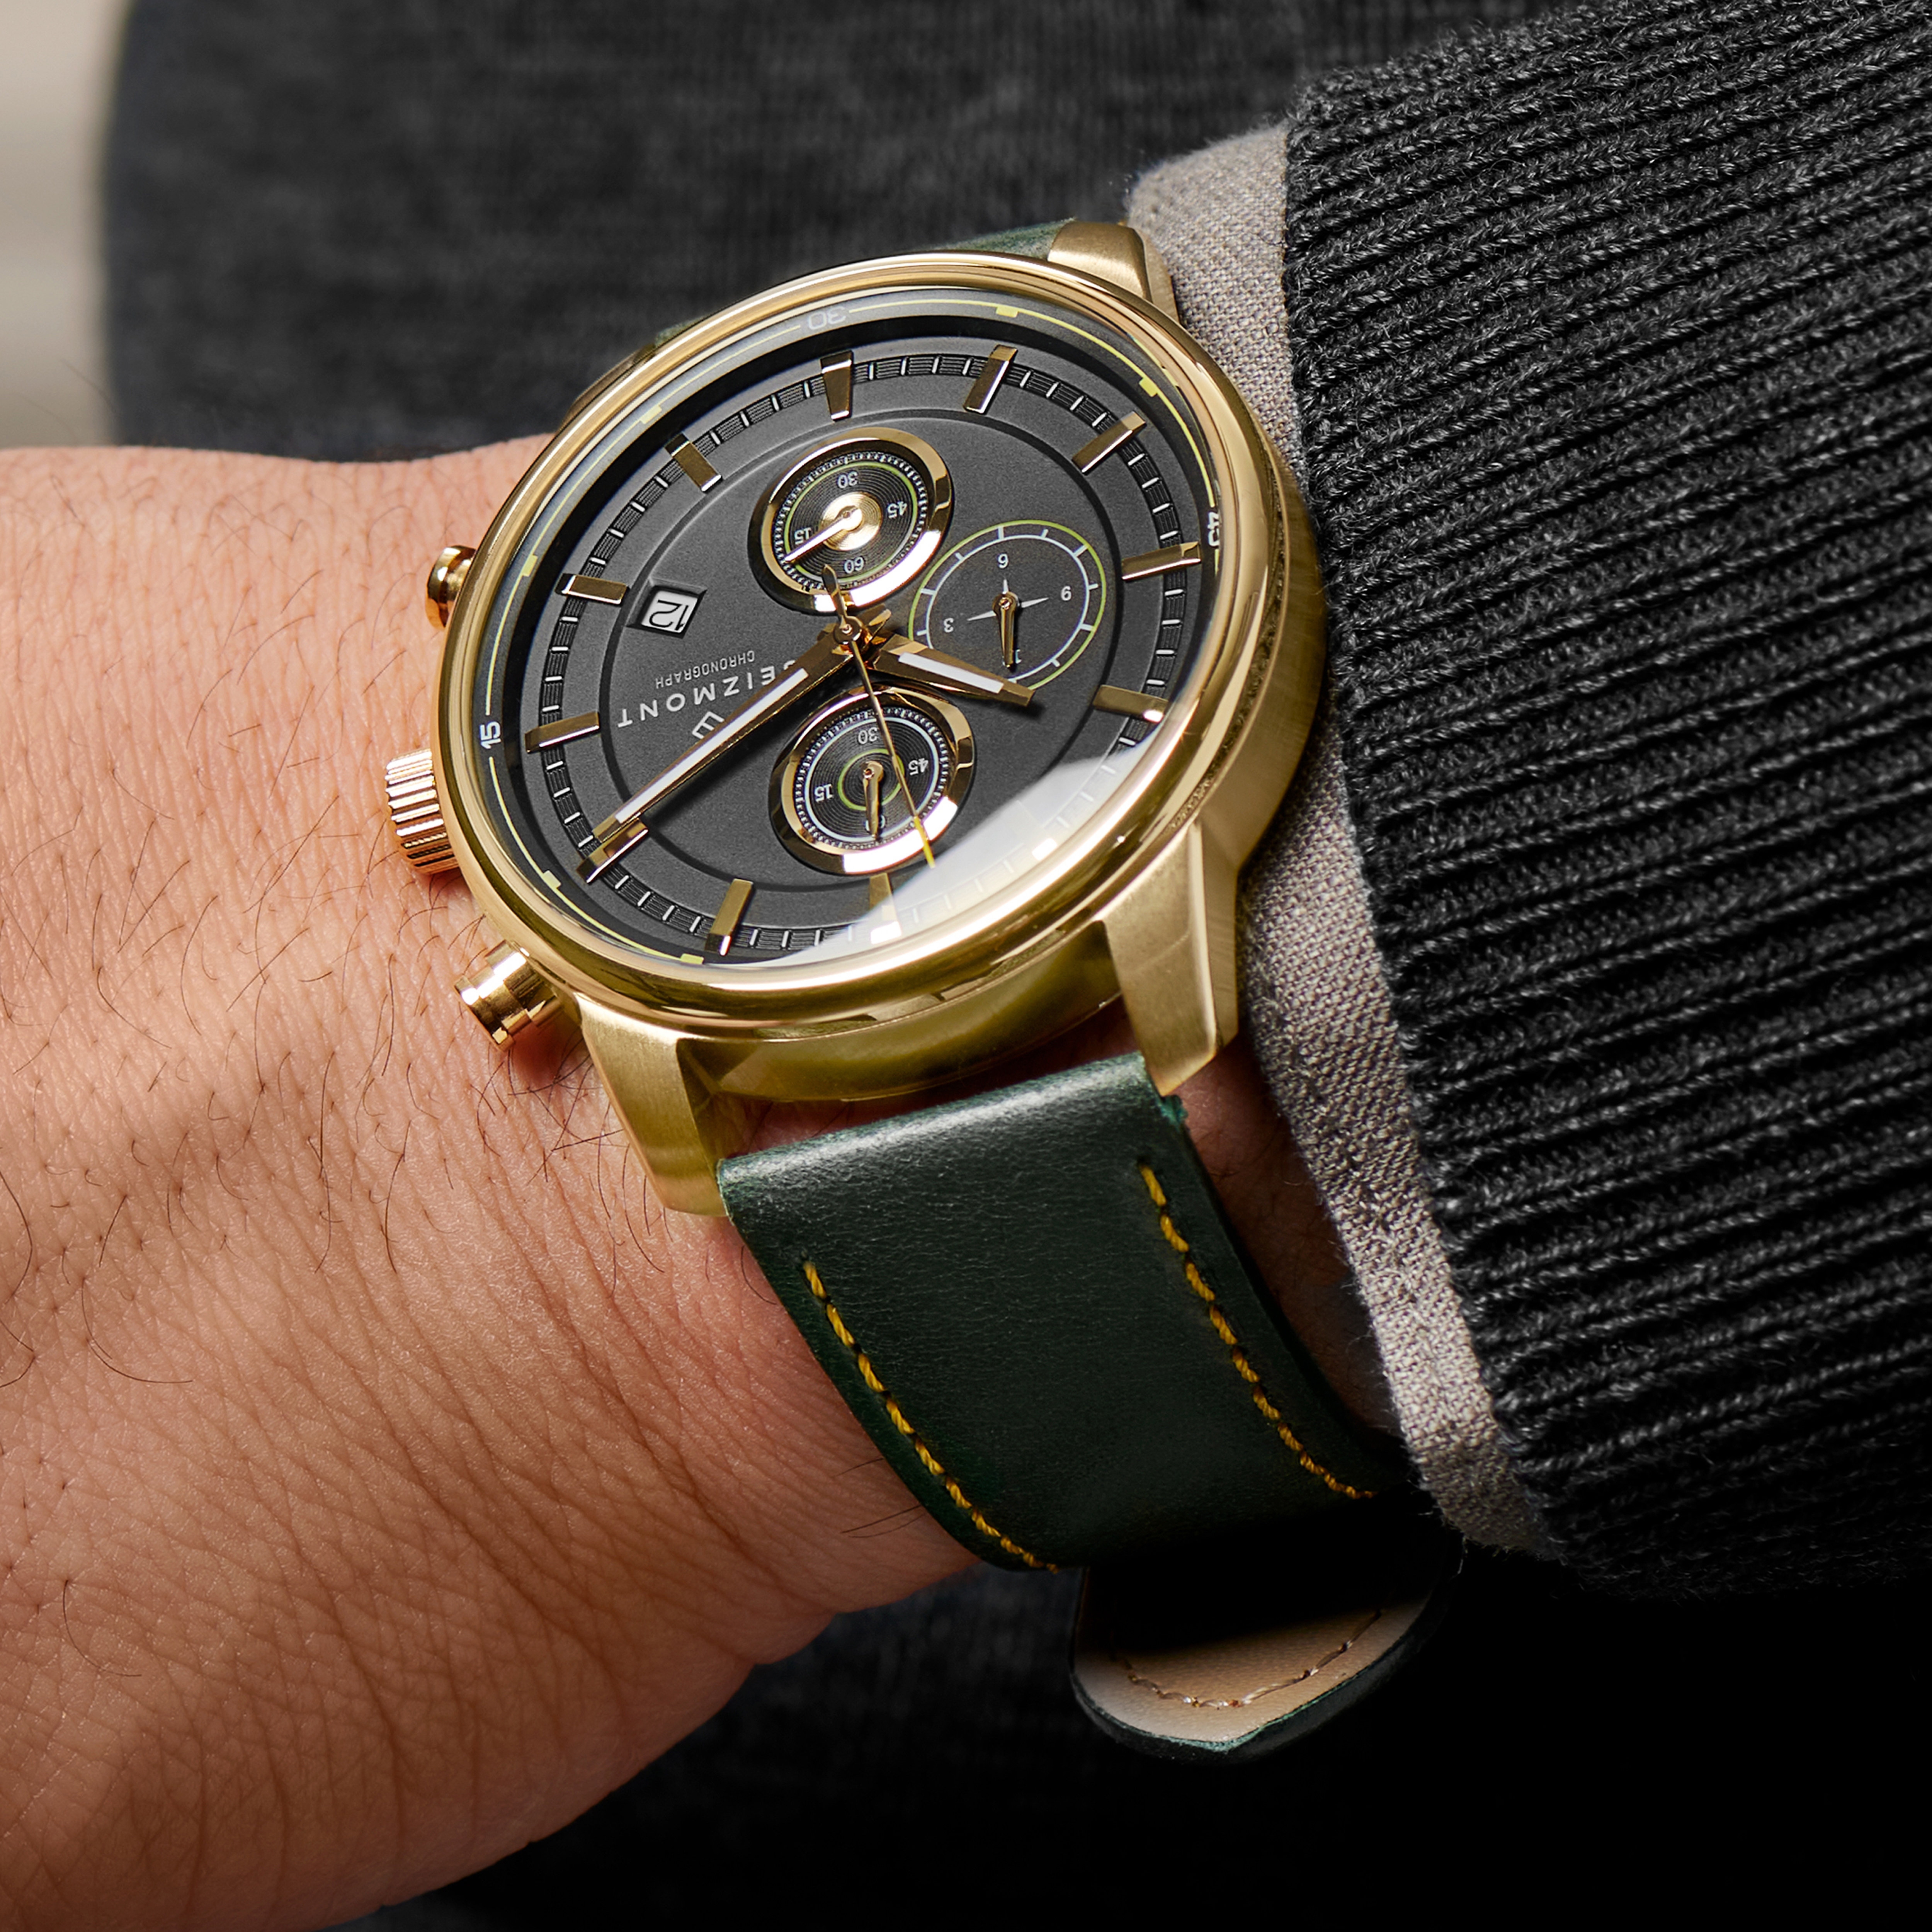 Parva | Gold-Tone Chronograph Watch Black | Dial In | & Green stock! Leather Strap With Seizmont